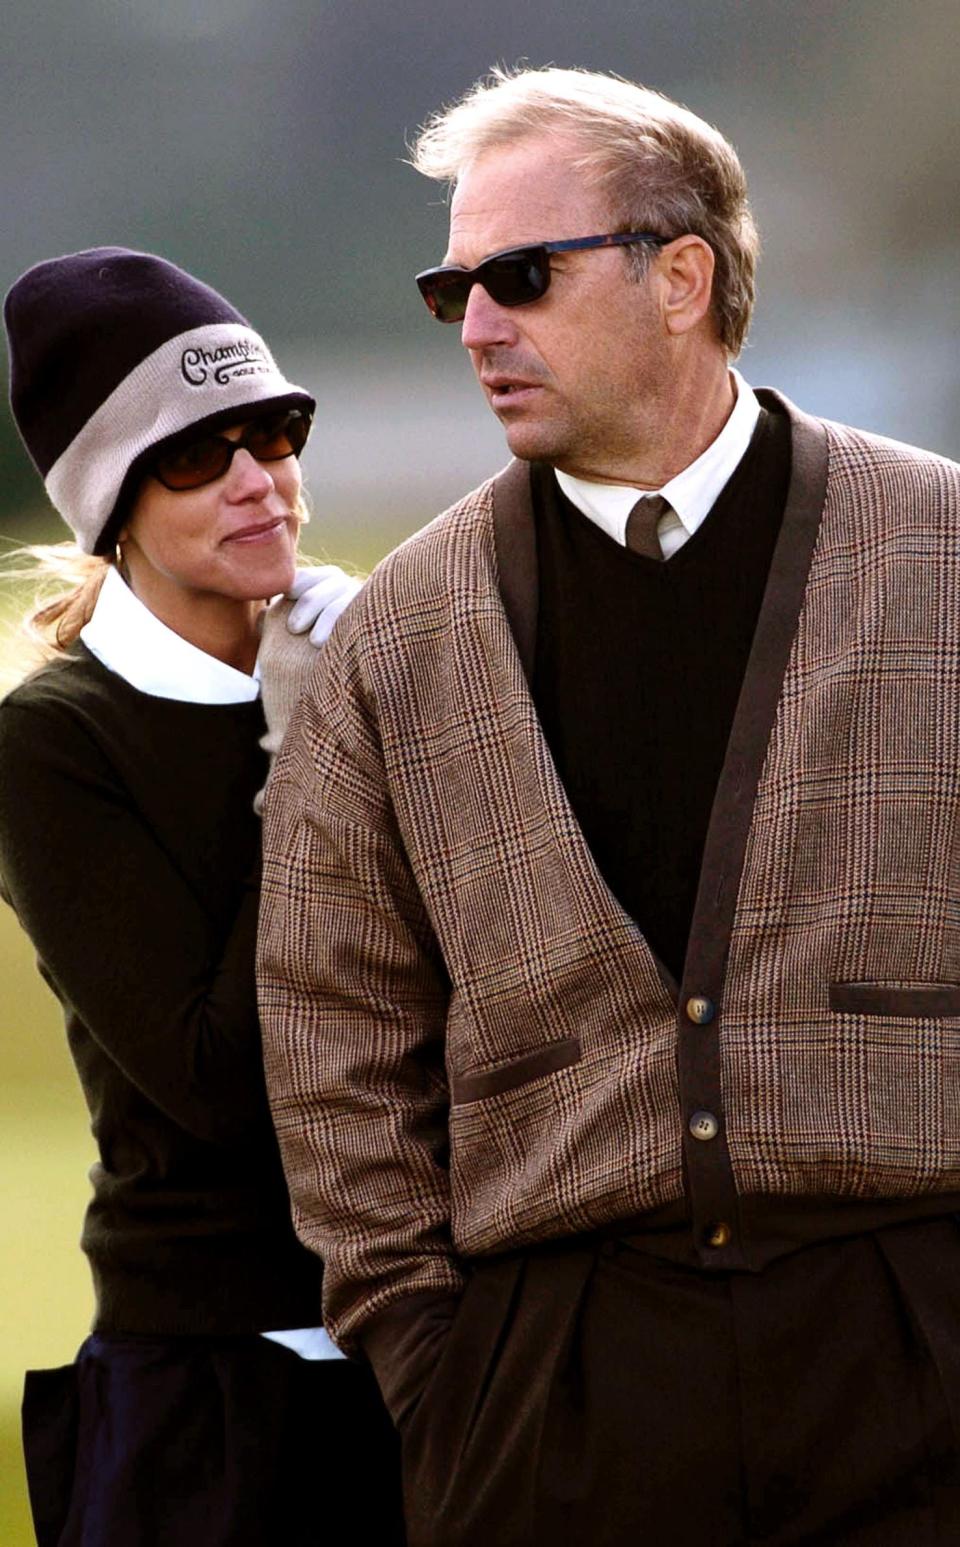 Kevin Costner and Christine Baumgartner on the Old Course of the Royal & Ancient, St Andrews, Scotland, ahead of the Dunhill Links Championship.